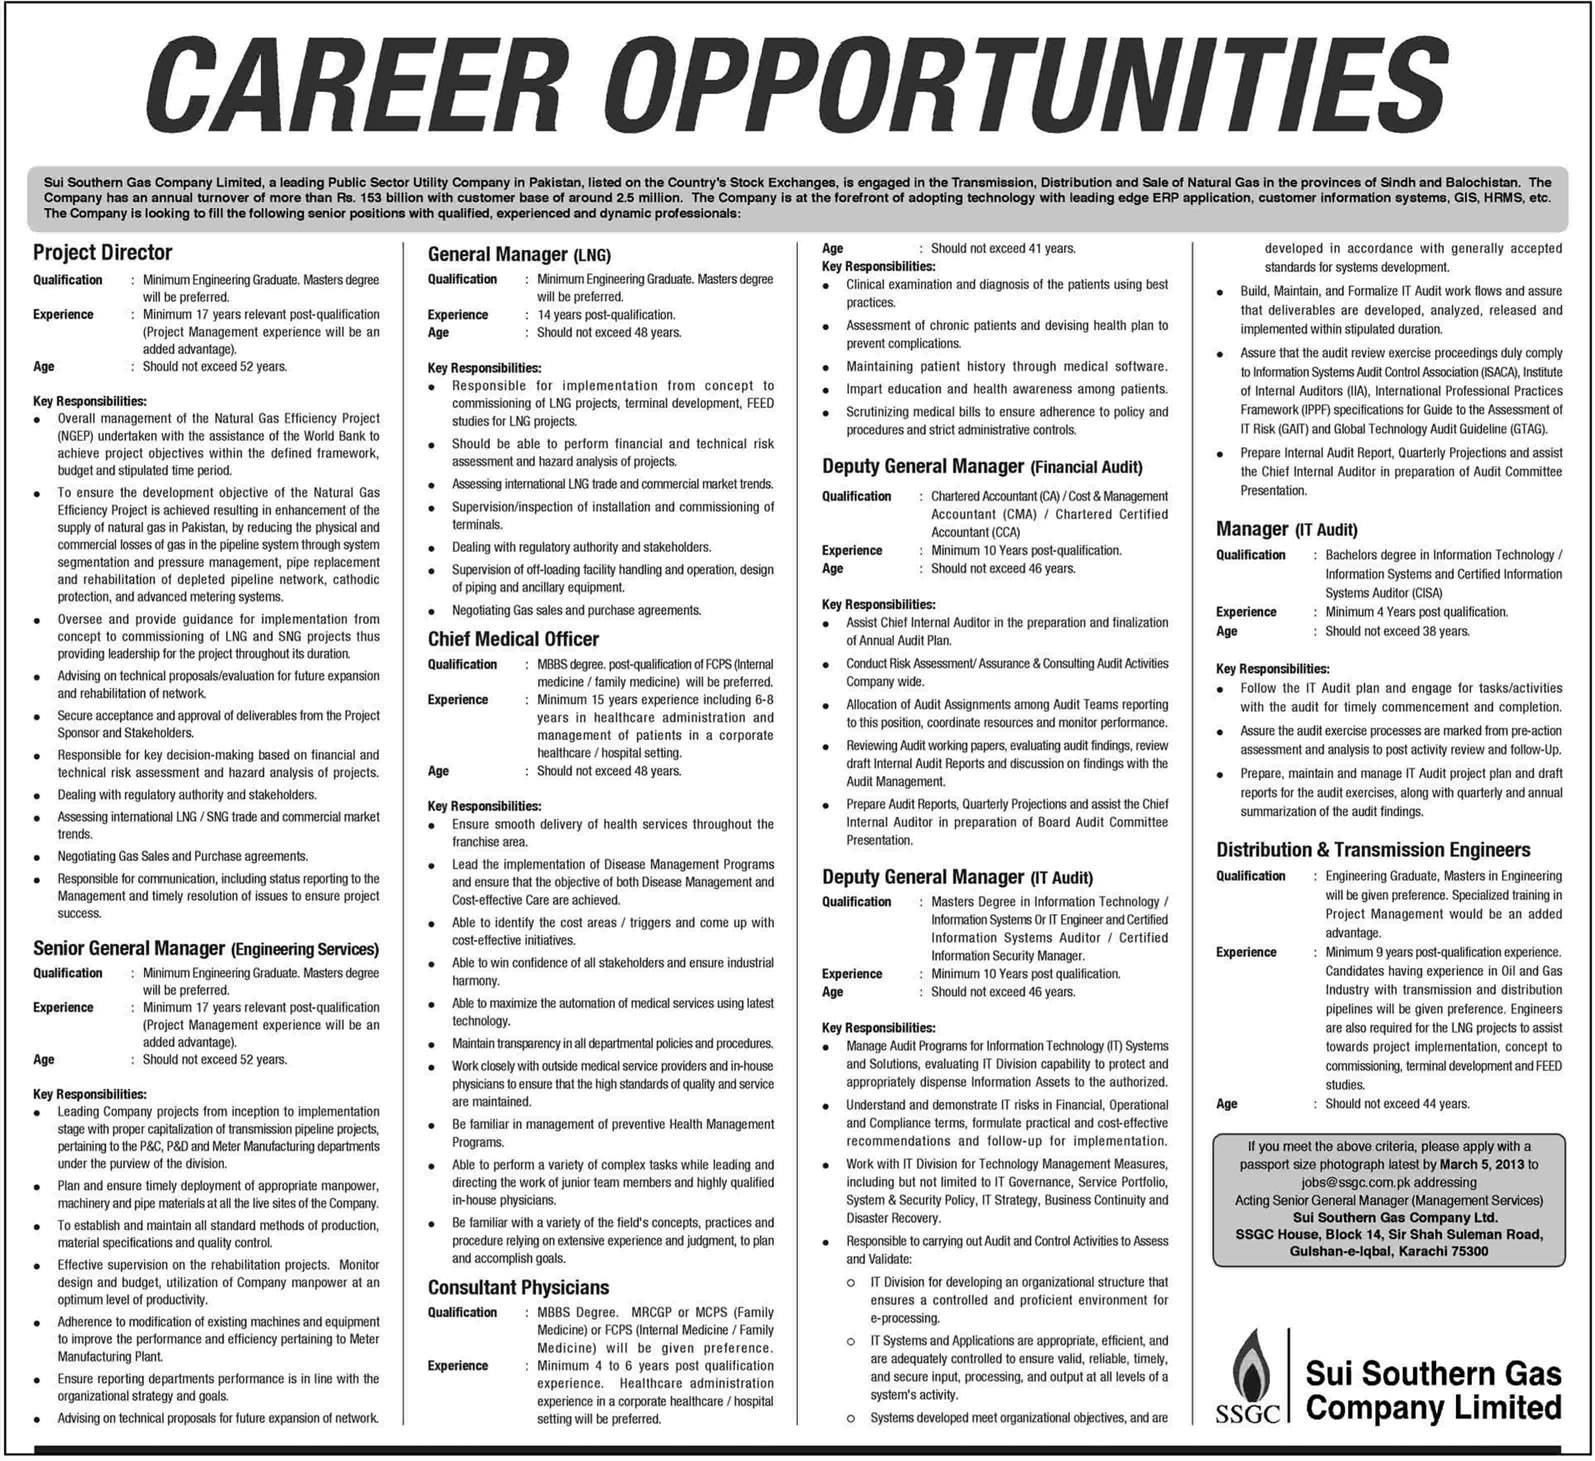 Sui Southern Gas Company Jobs 2013 in Karachi & Sindh Latest Ad for Managers, Doctors & Engineers